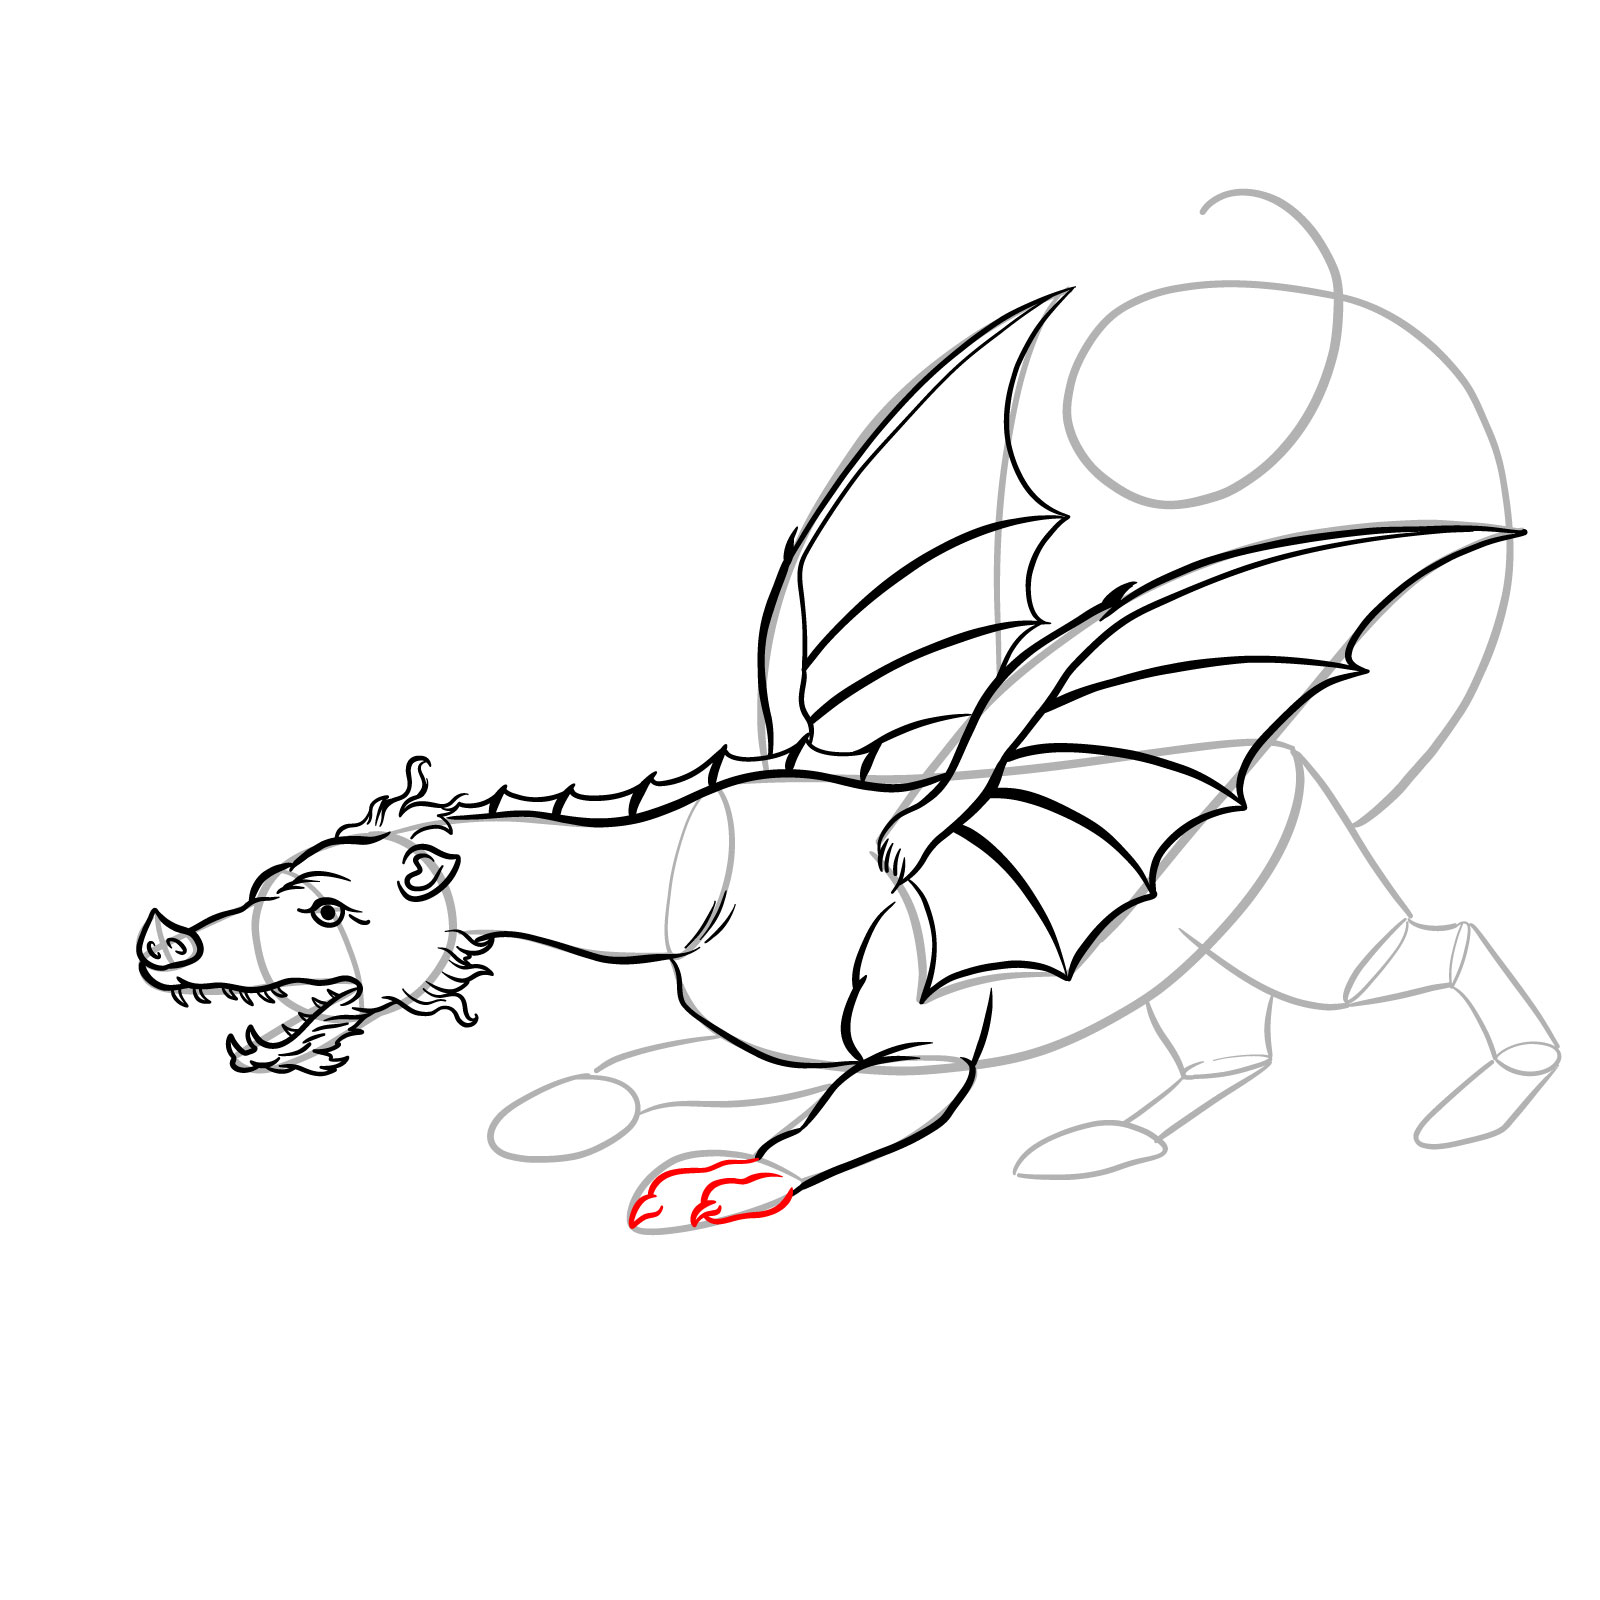 How to draw a classic European dragon - step 27